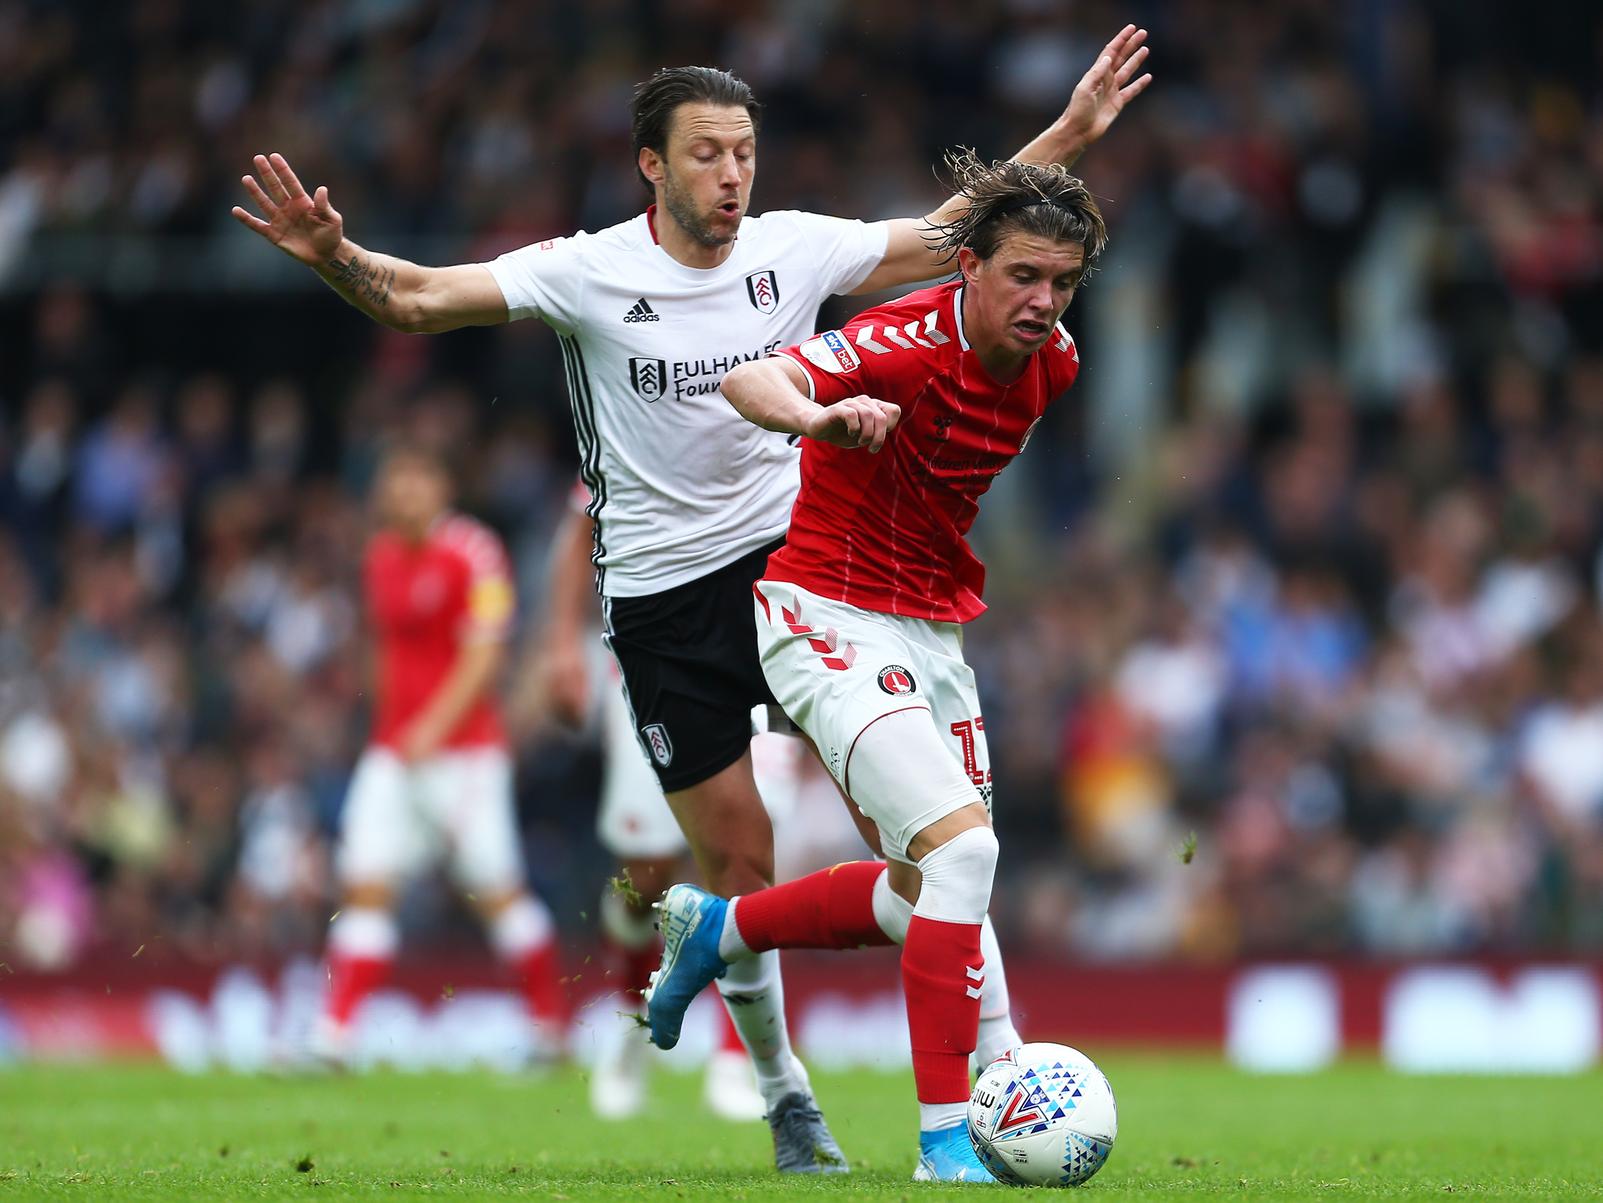 Chelsea youngster Conor Gallagher has claimed he's looking to break into the Blues starting line-up next season, after dazzling on loan with Charlton Athletic in the 2019/20 campaign so far. (London News Online)